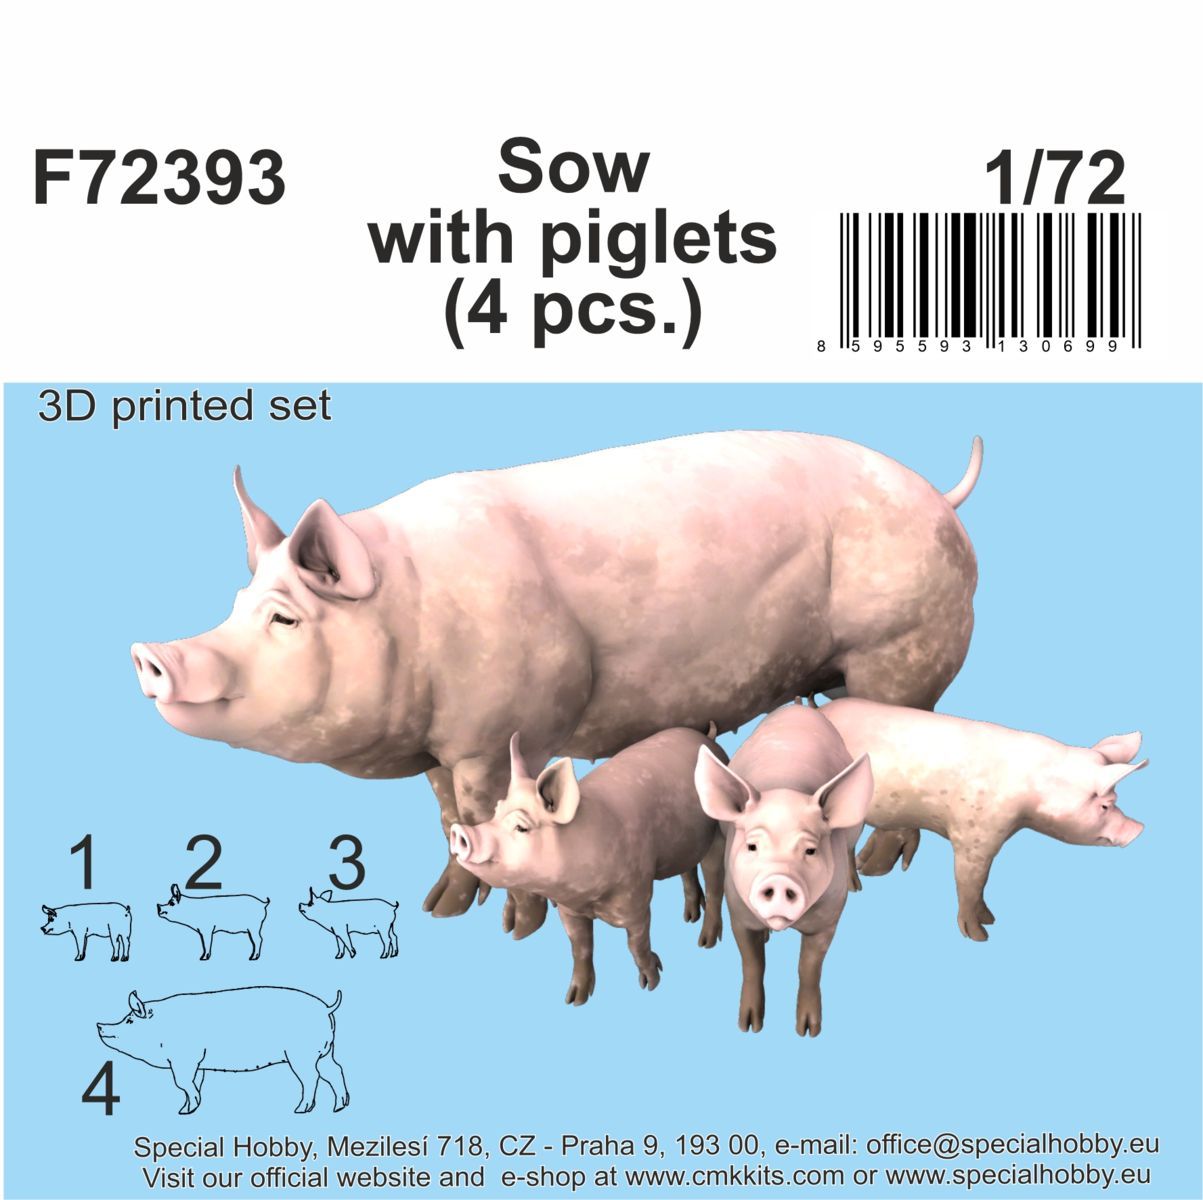 Sow with piglets